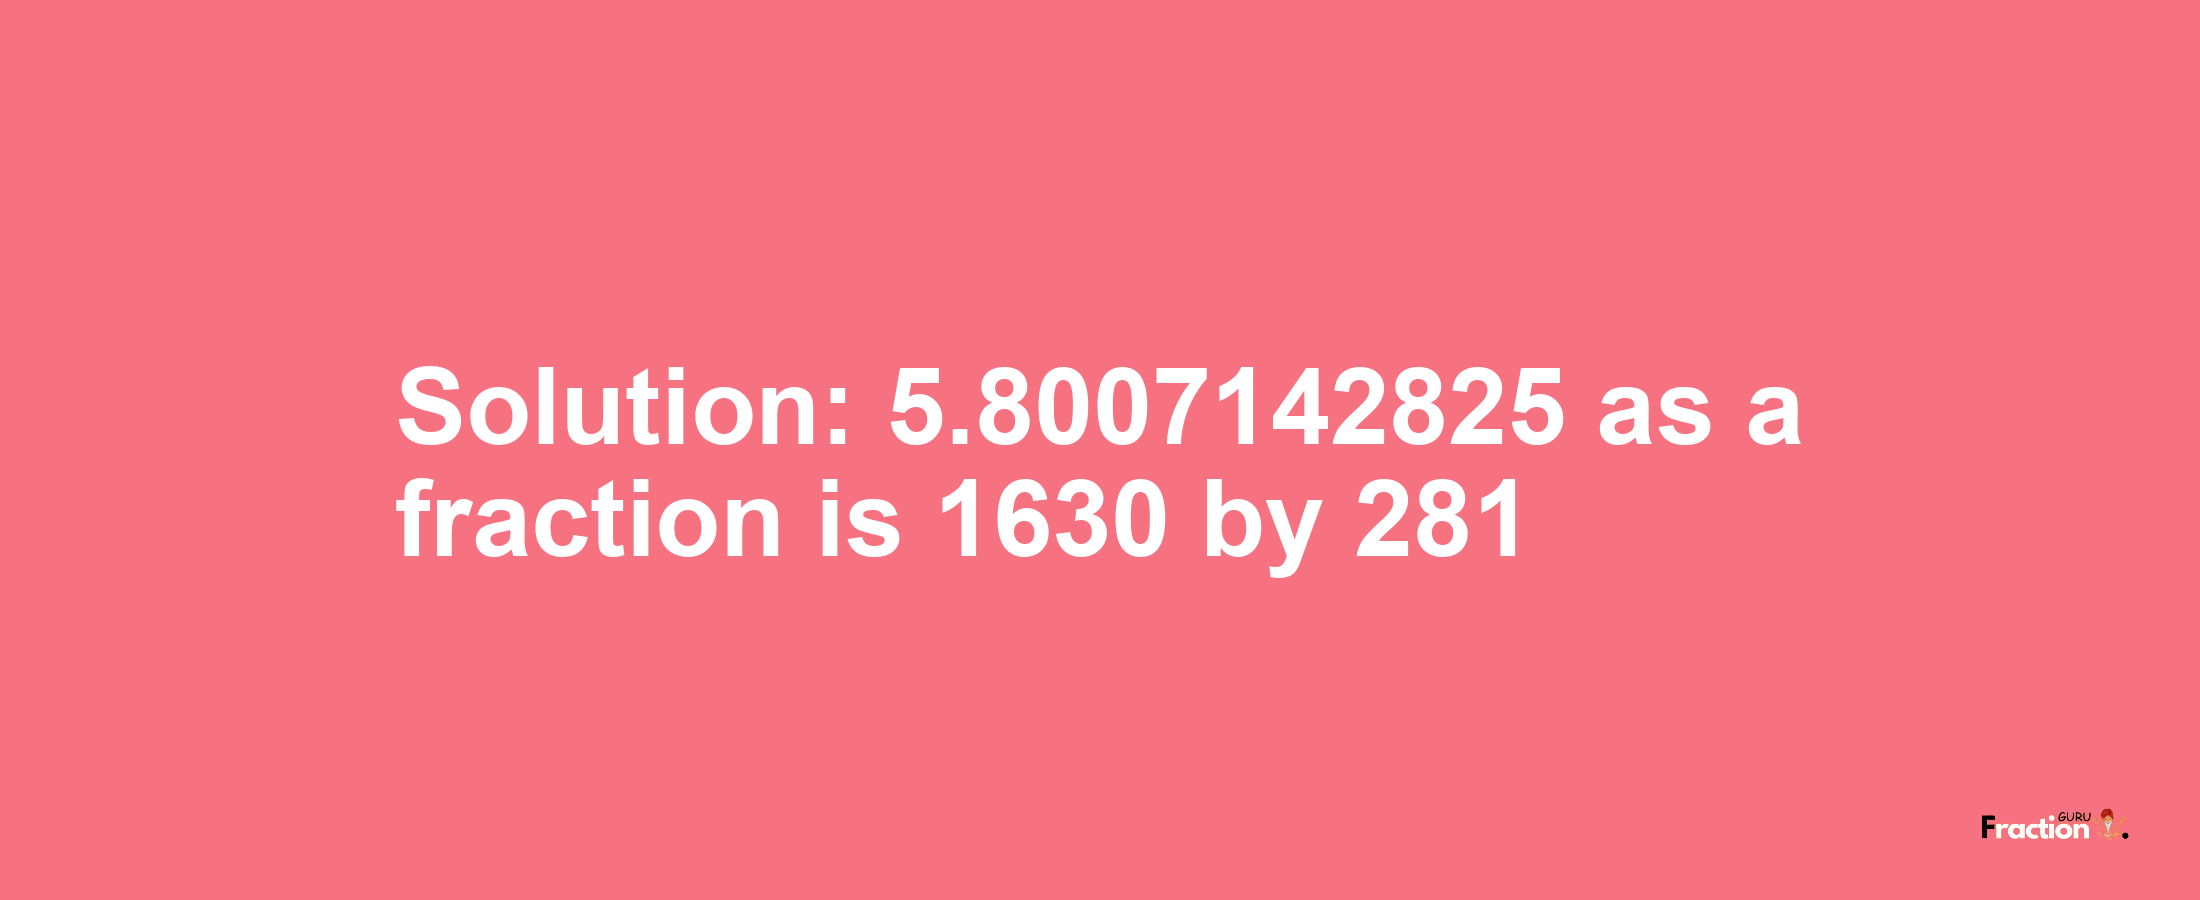 Solution:5.8007142825 as a fraction is 1630/281